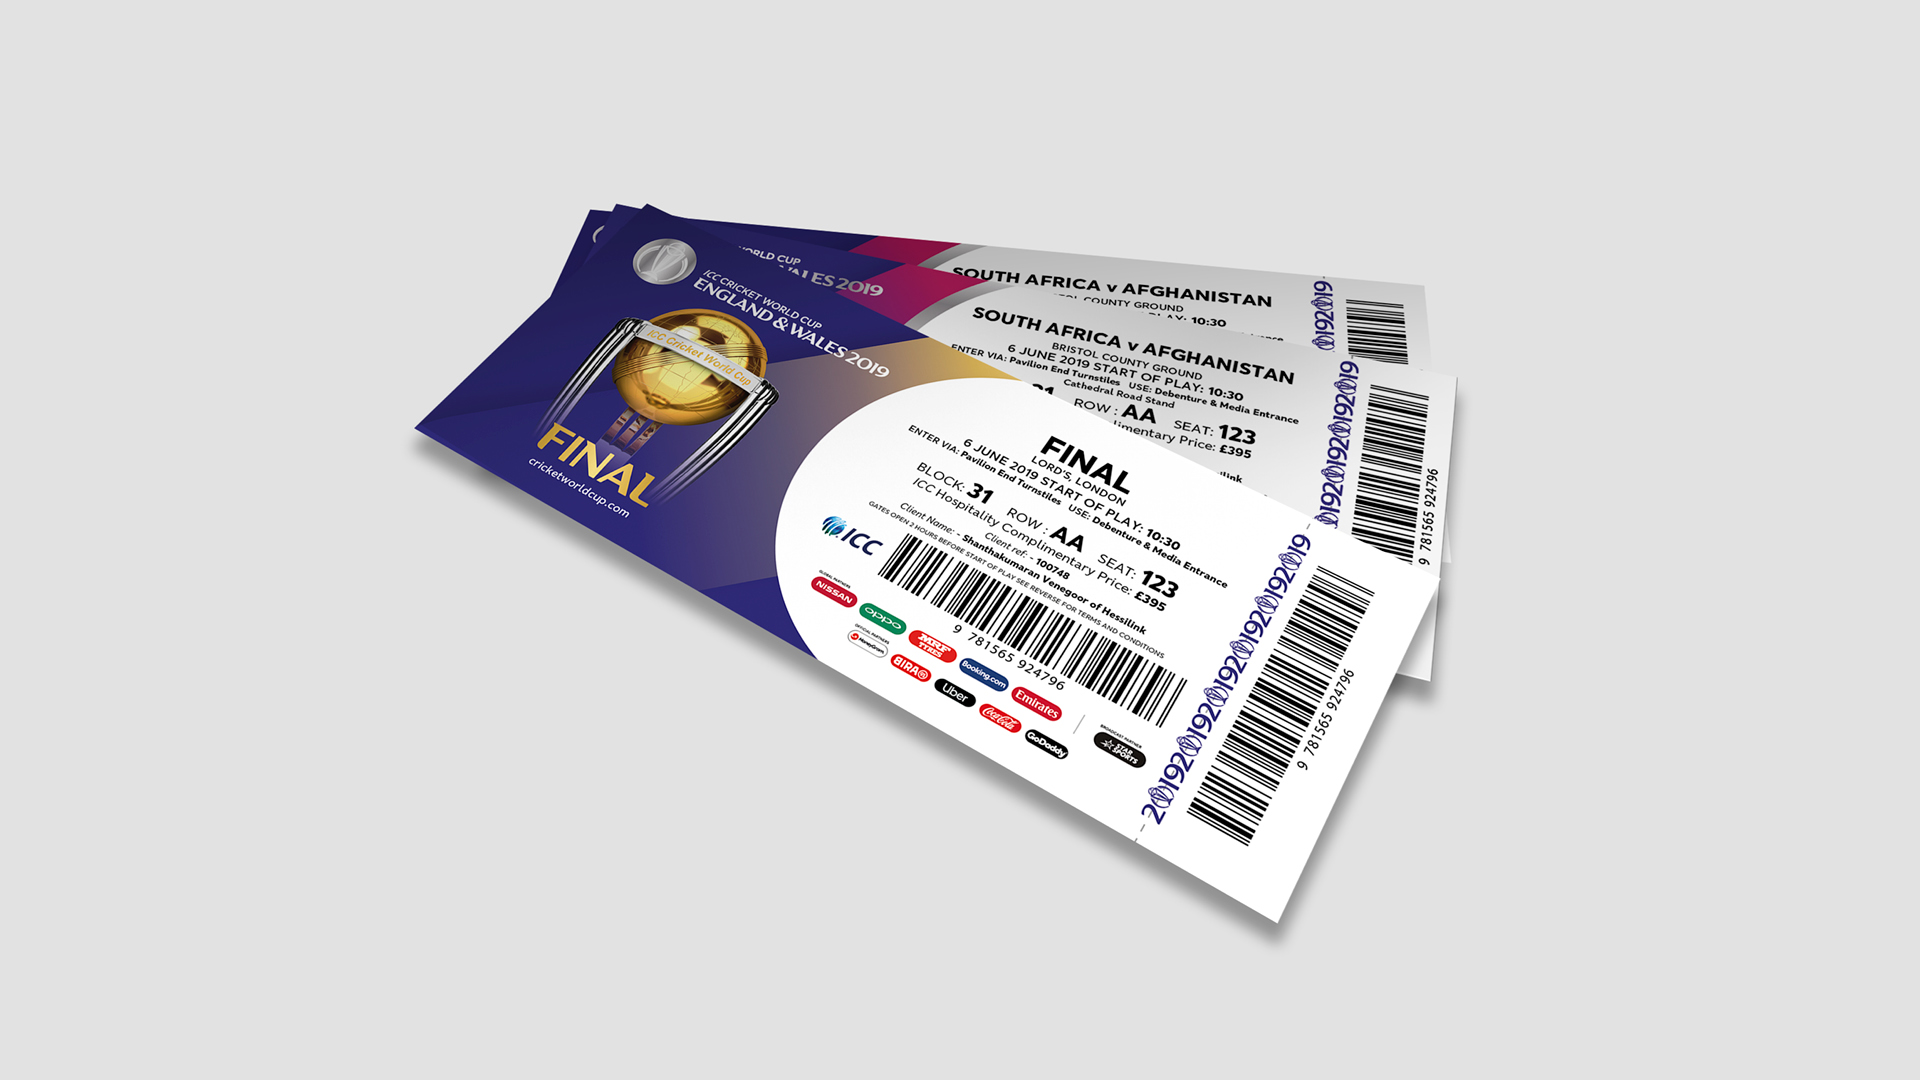 cricket world cup tickets